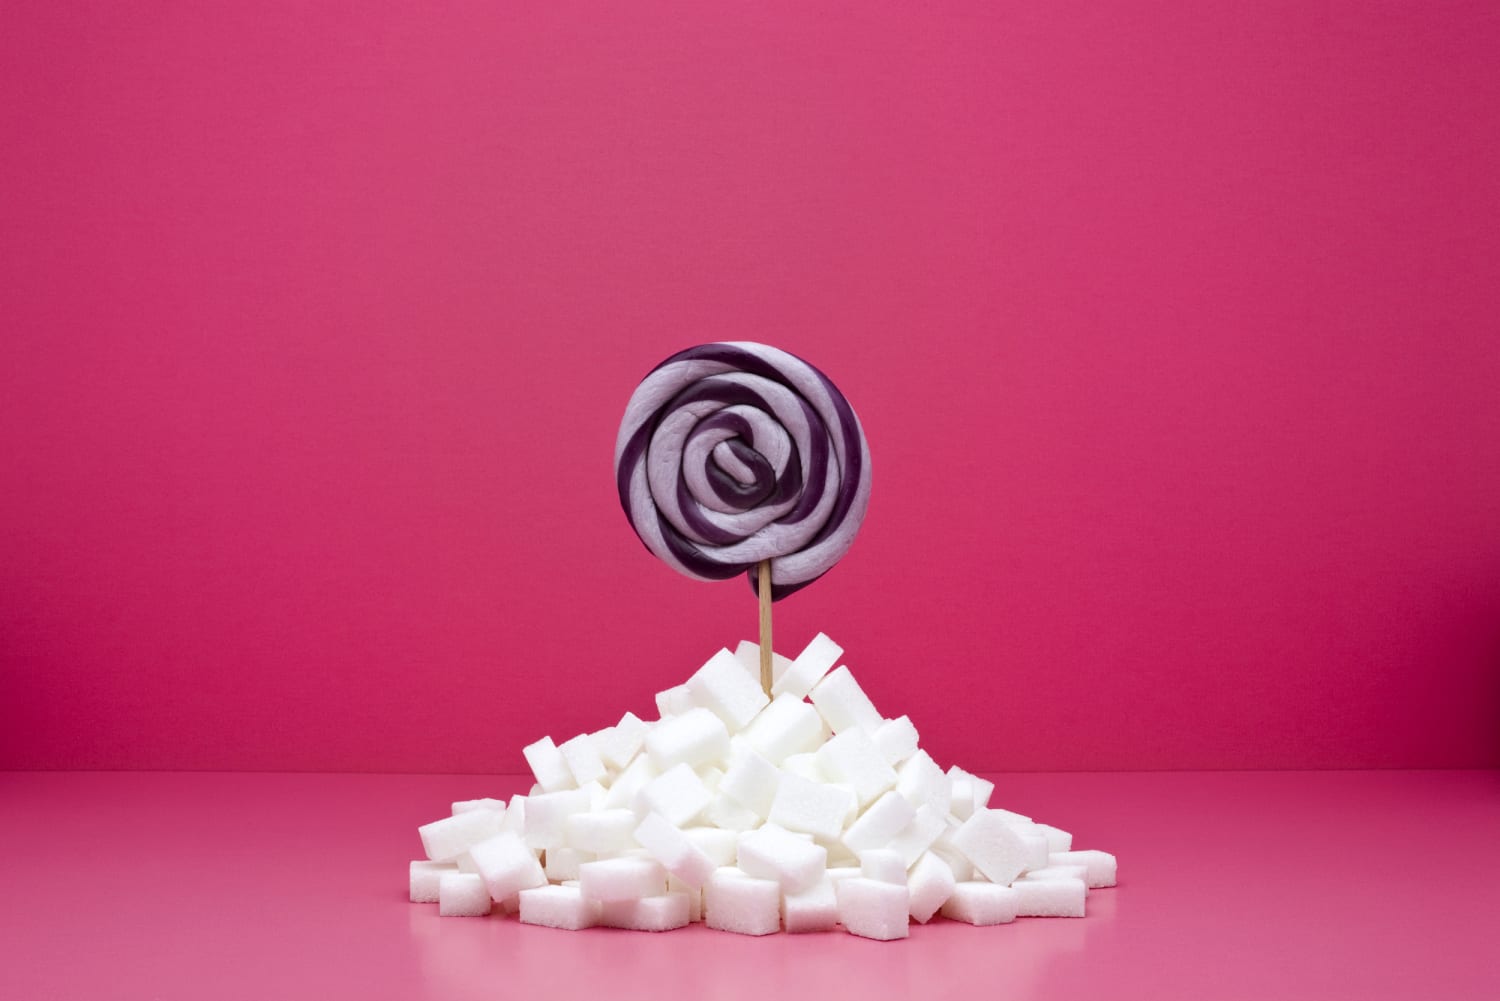 5 myths about quitting sugar, debunked